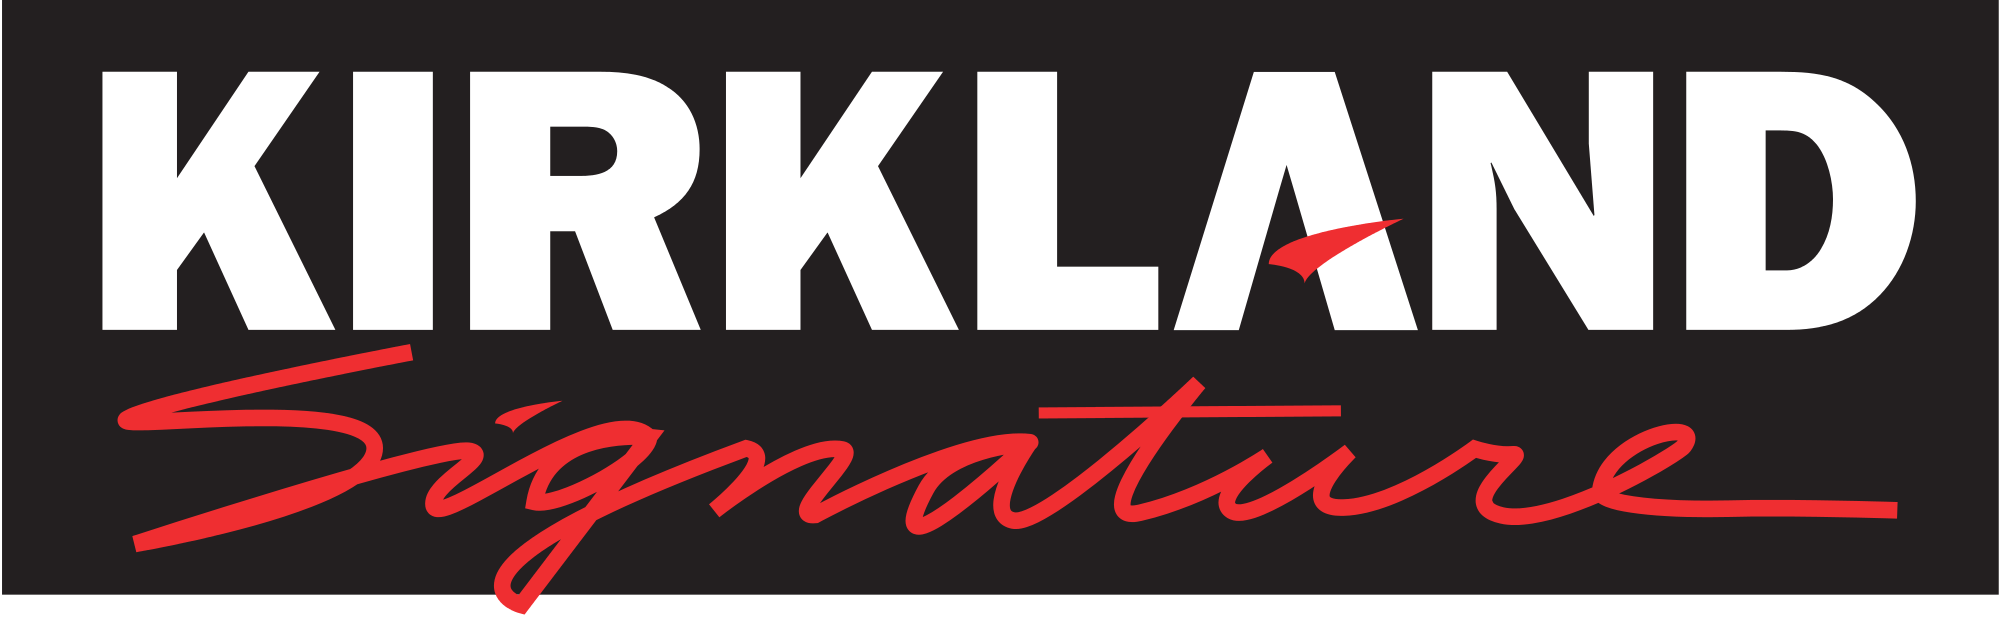 Costco Company Logo - Kirkland Signature is the Brand that Breaks All the Rules